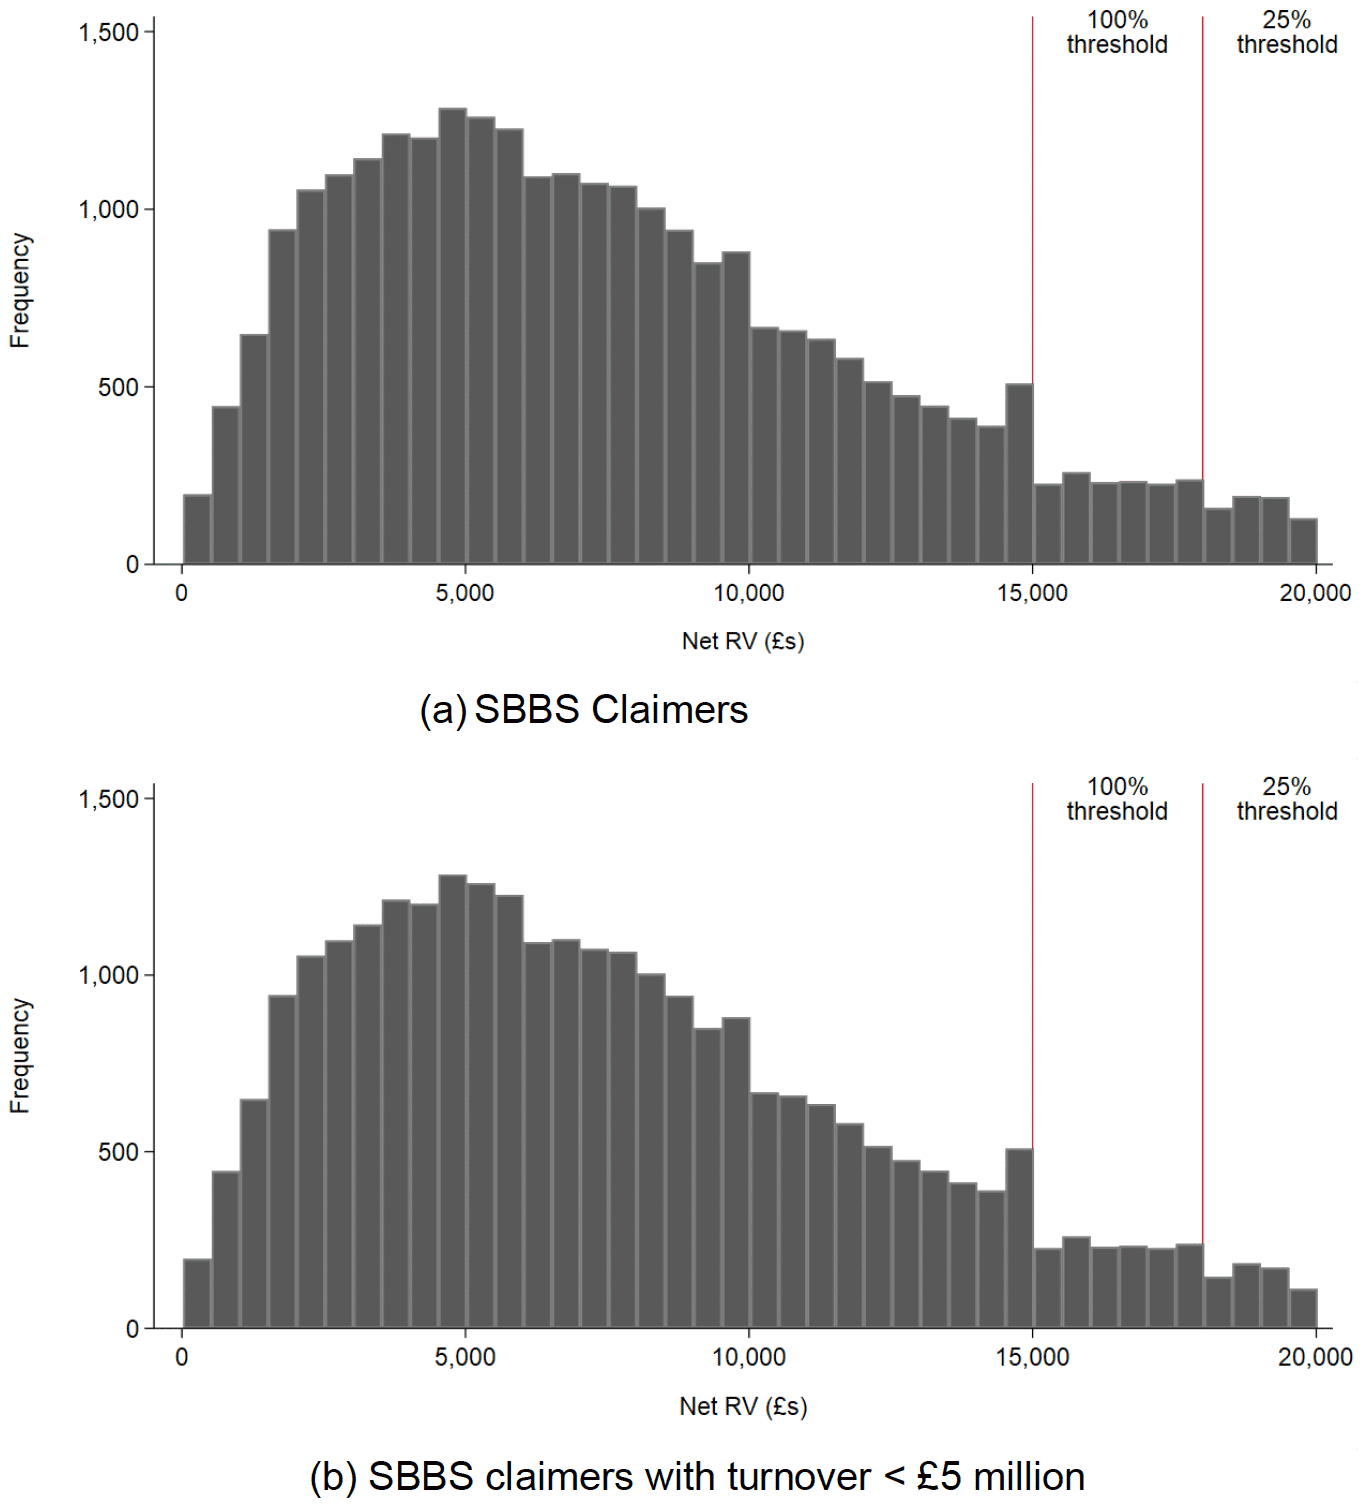 Two histograms show the distribution of rateable value amongst those businesses linked to ONS data, for claimers and those claimers with a turnover less than £5 million.